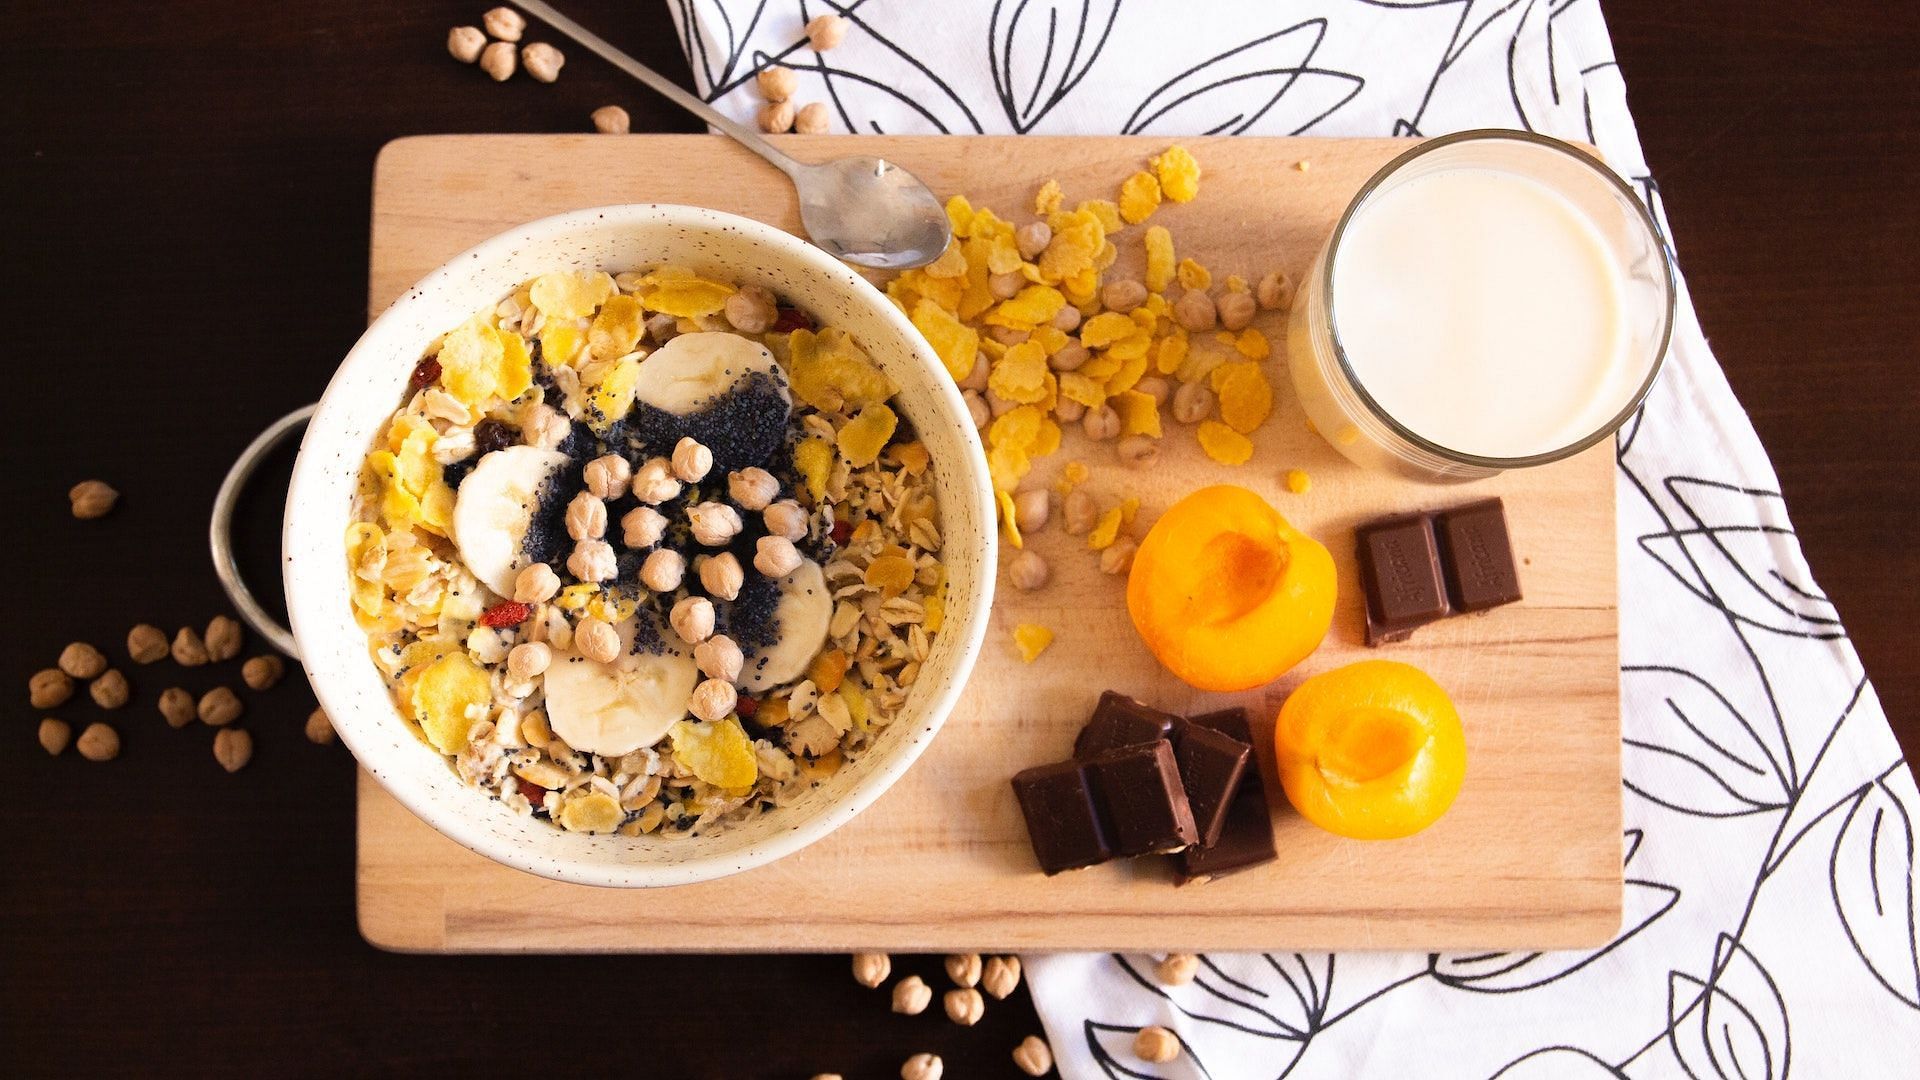 All about soy protein. Image via Pexels/Paul Seling